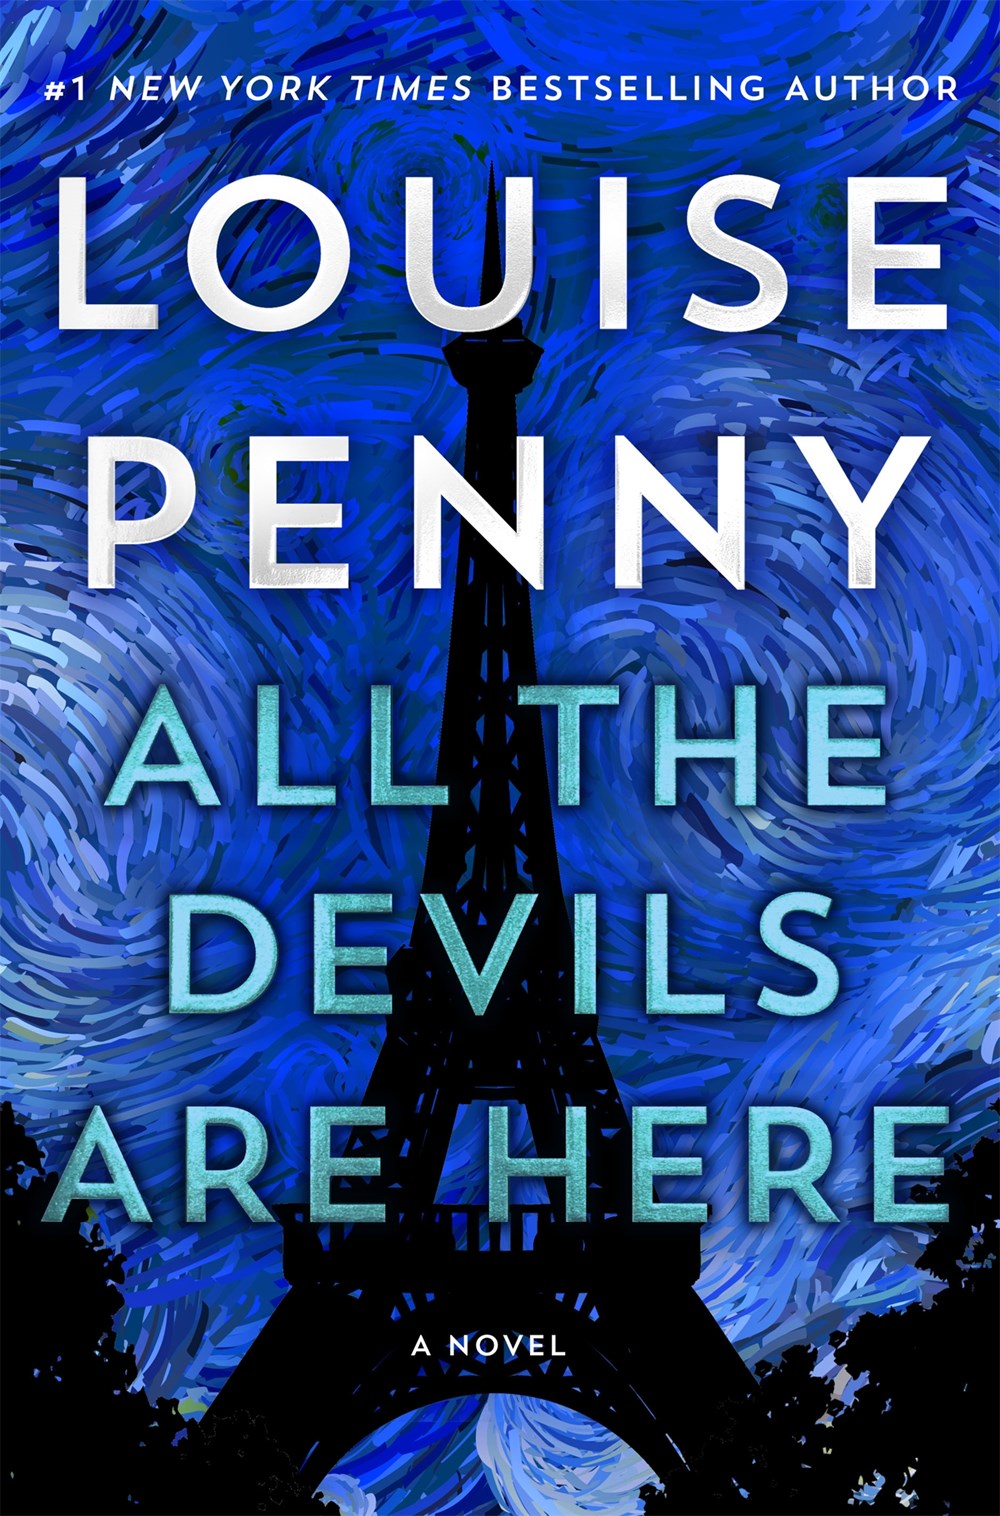 All The Devils Are Here (Chief Inspector Armand Gamache #16) By Louise Penny Release Date?